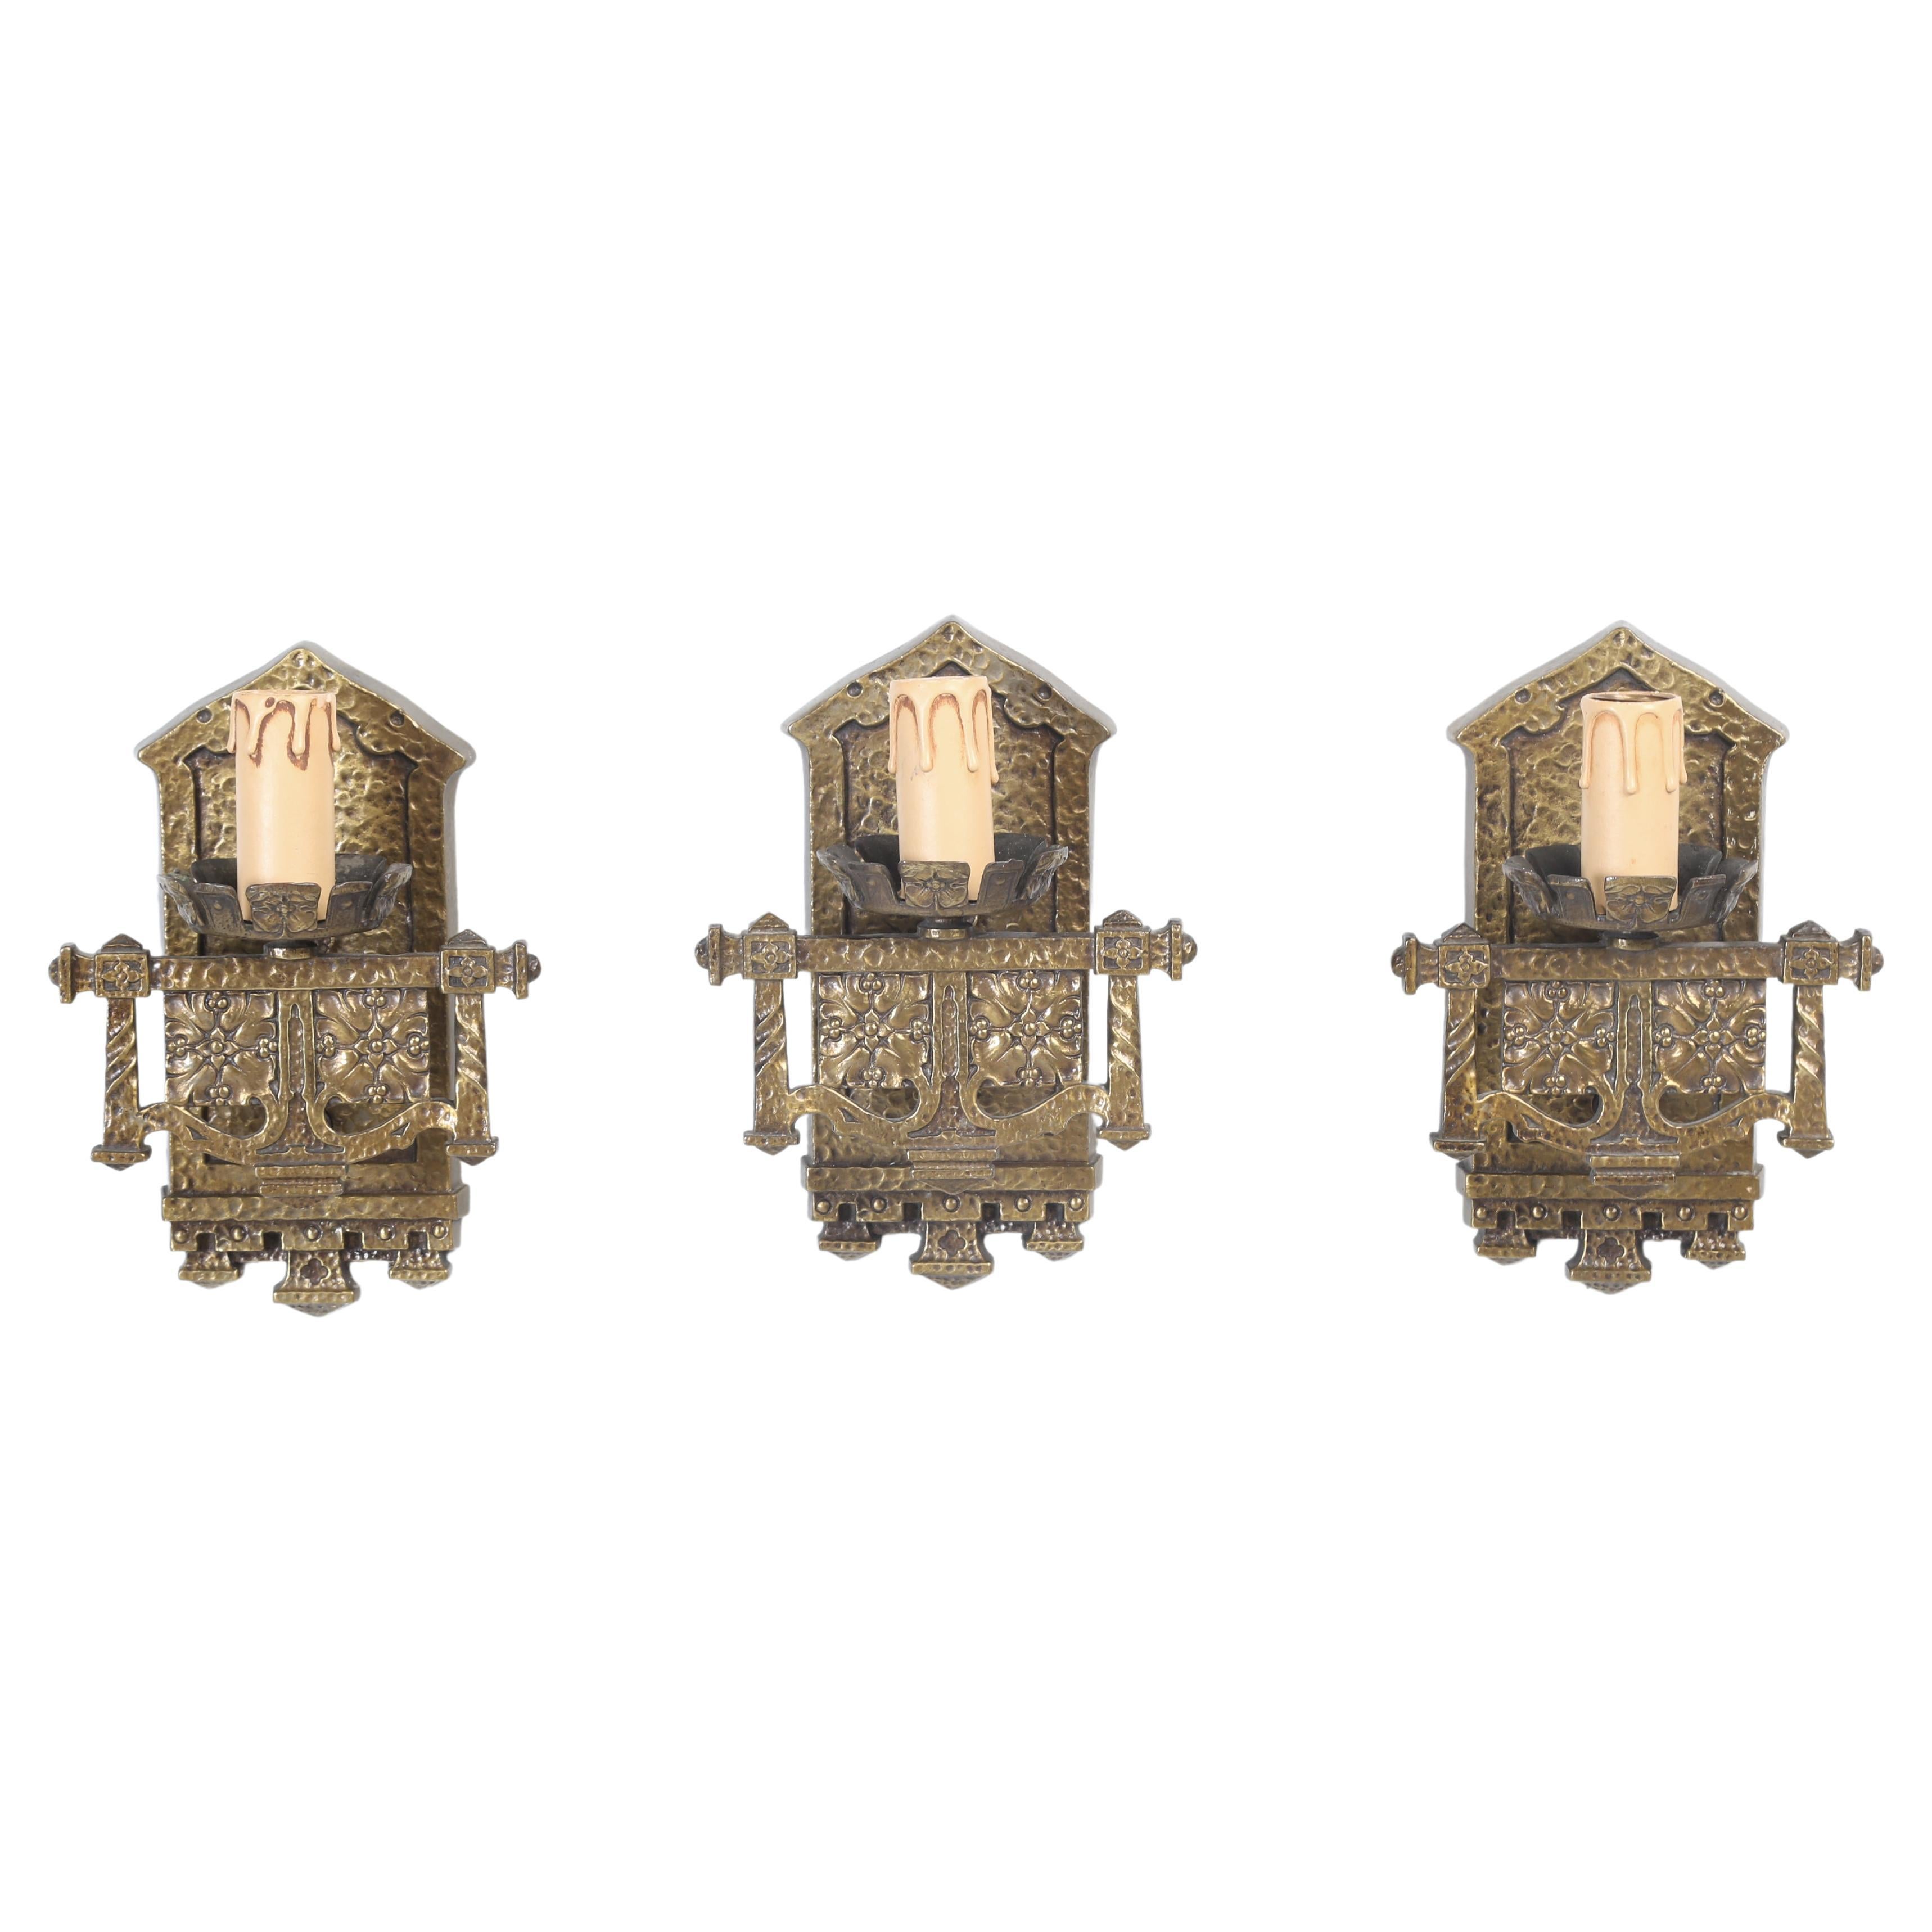 Set of (3) Heavy Hand-Made c1908 Wall Sconces Removed from a Historic Home